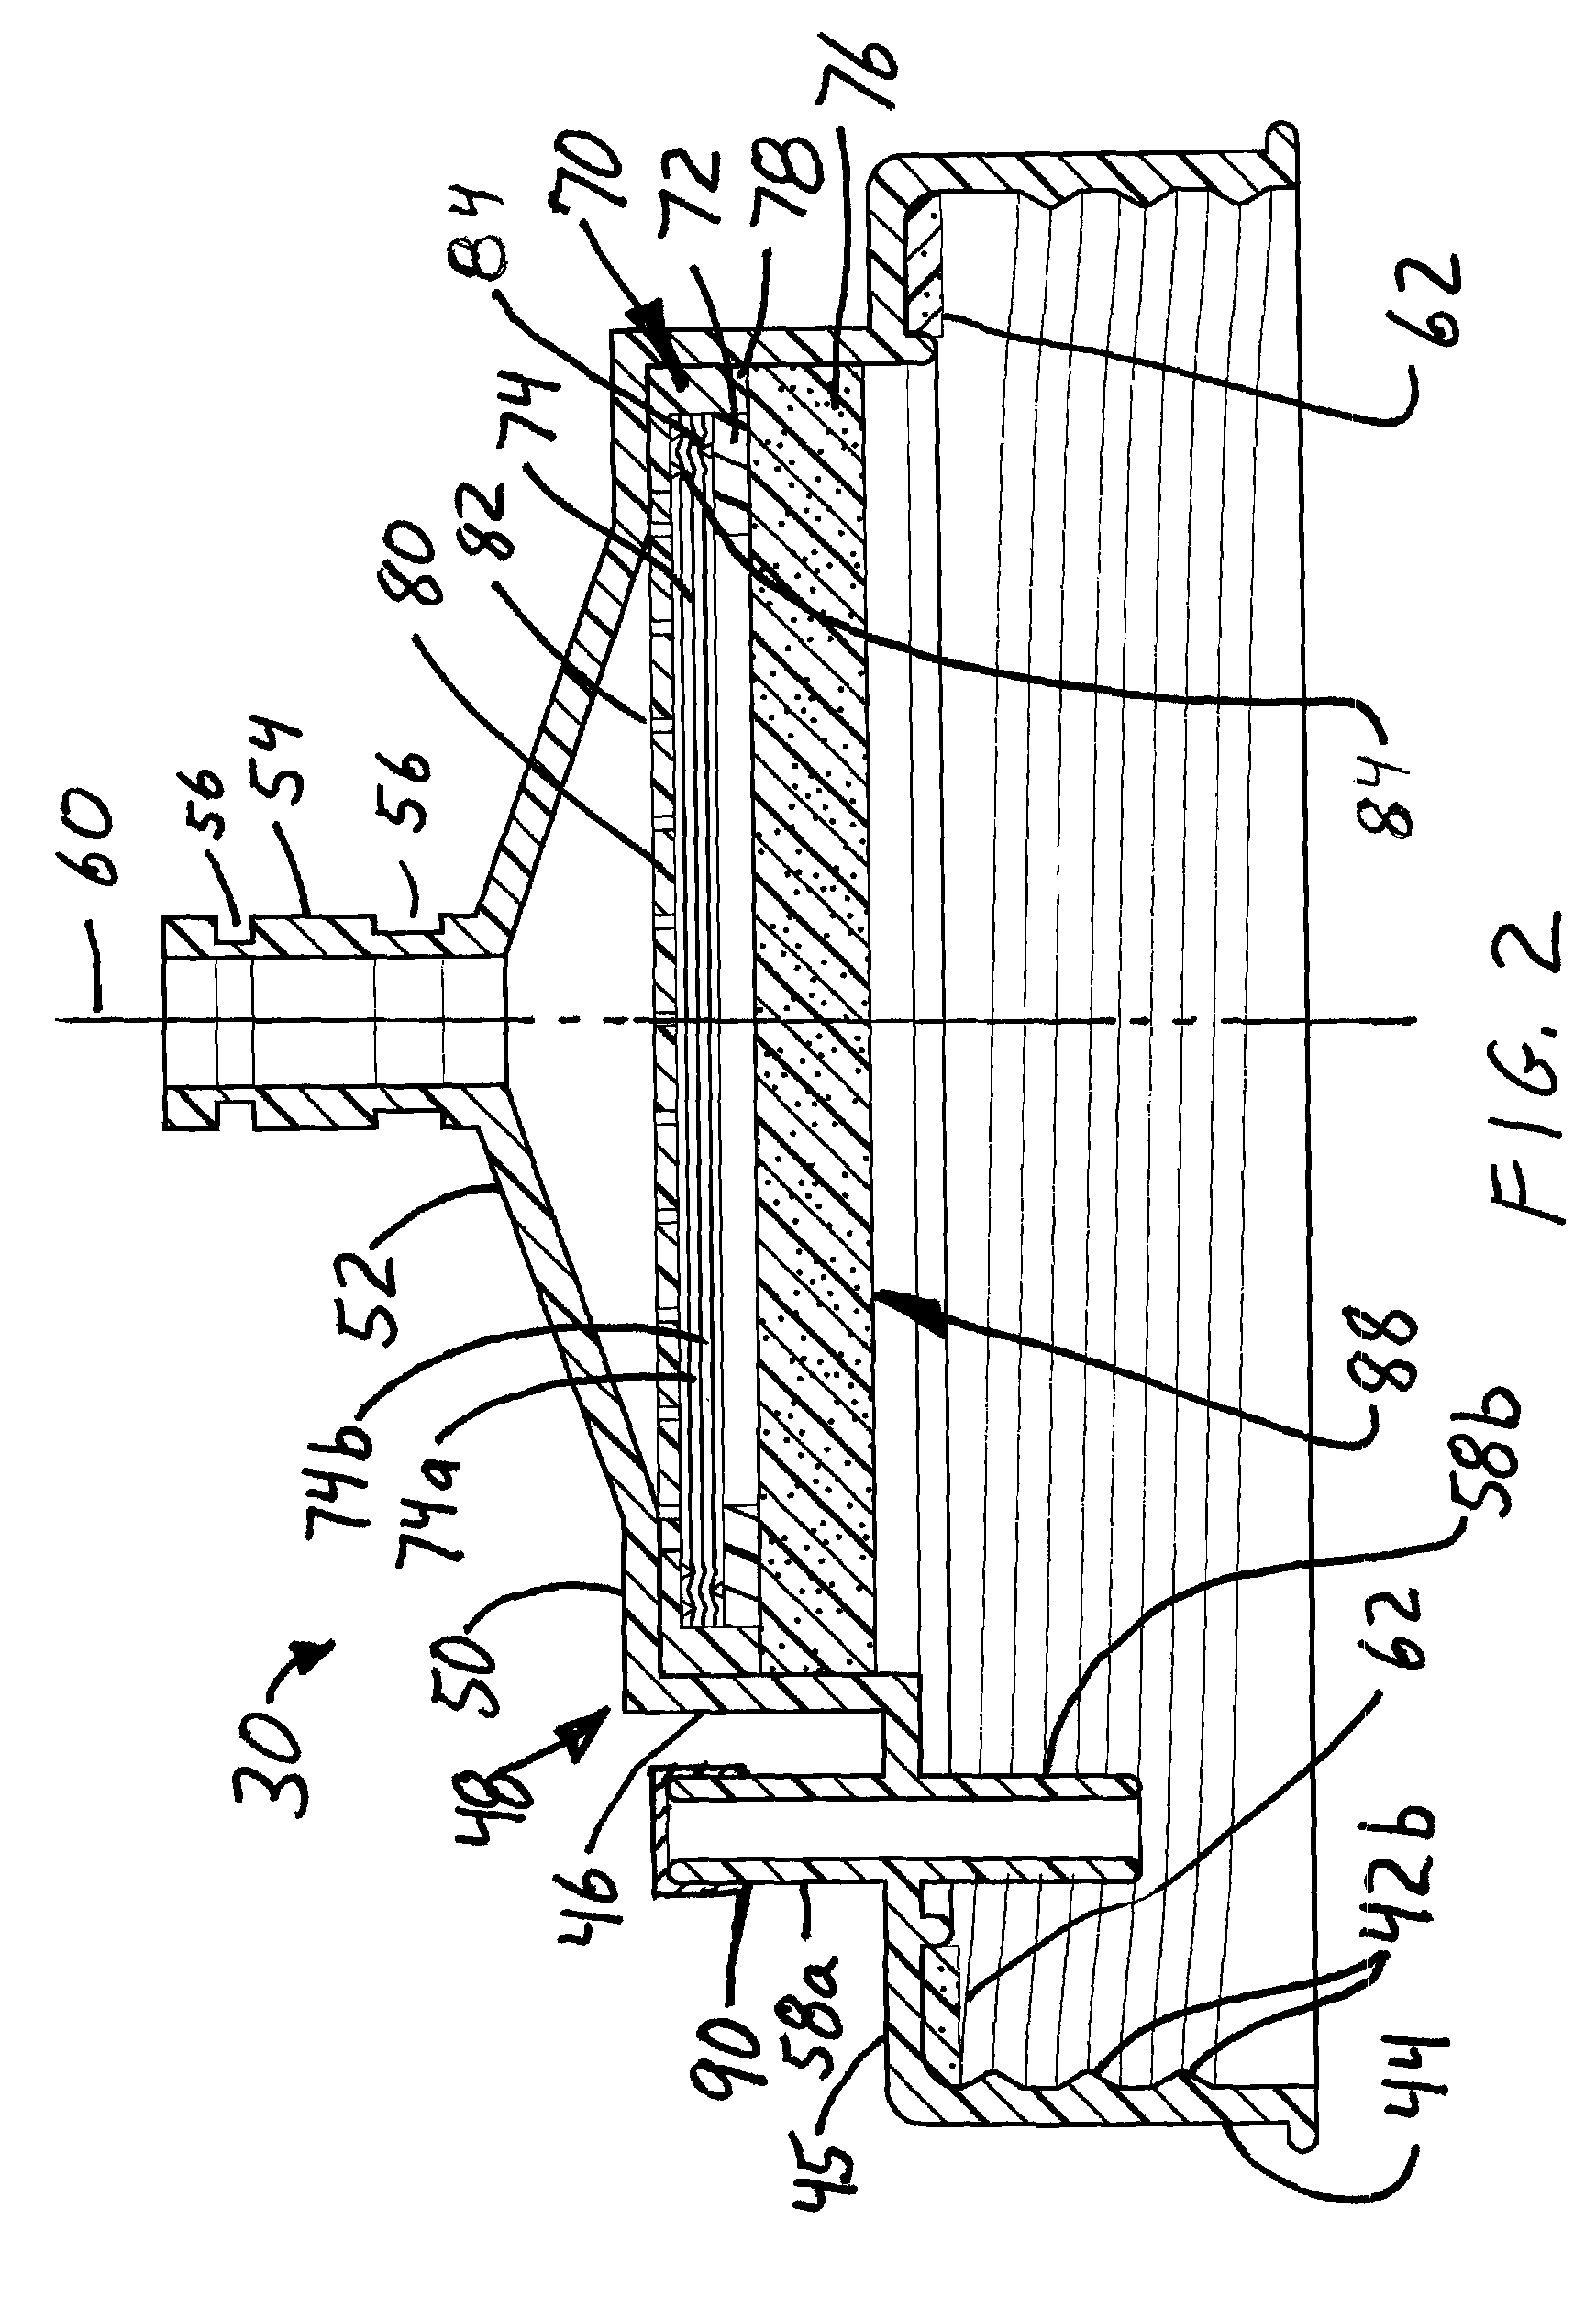 Cap with filter and transfer apparatus